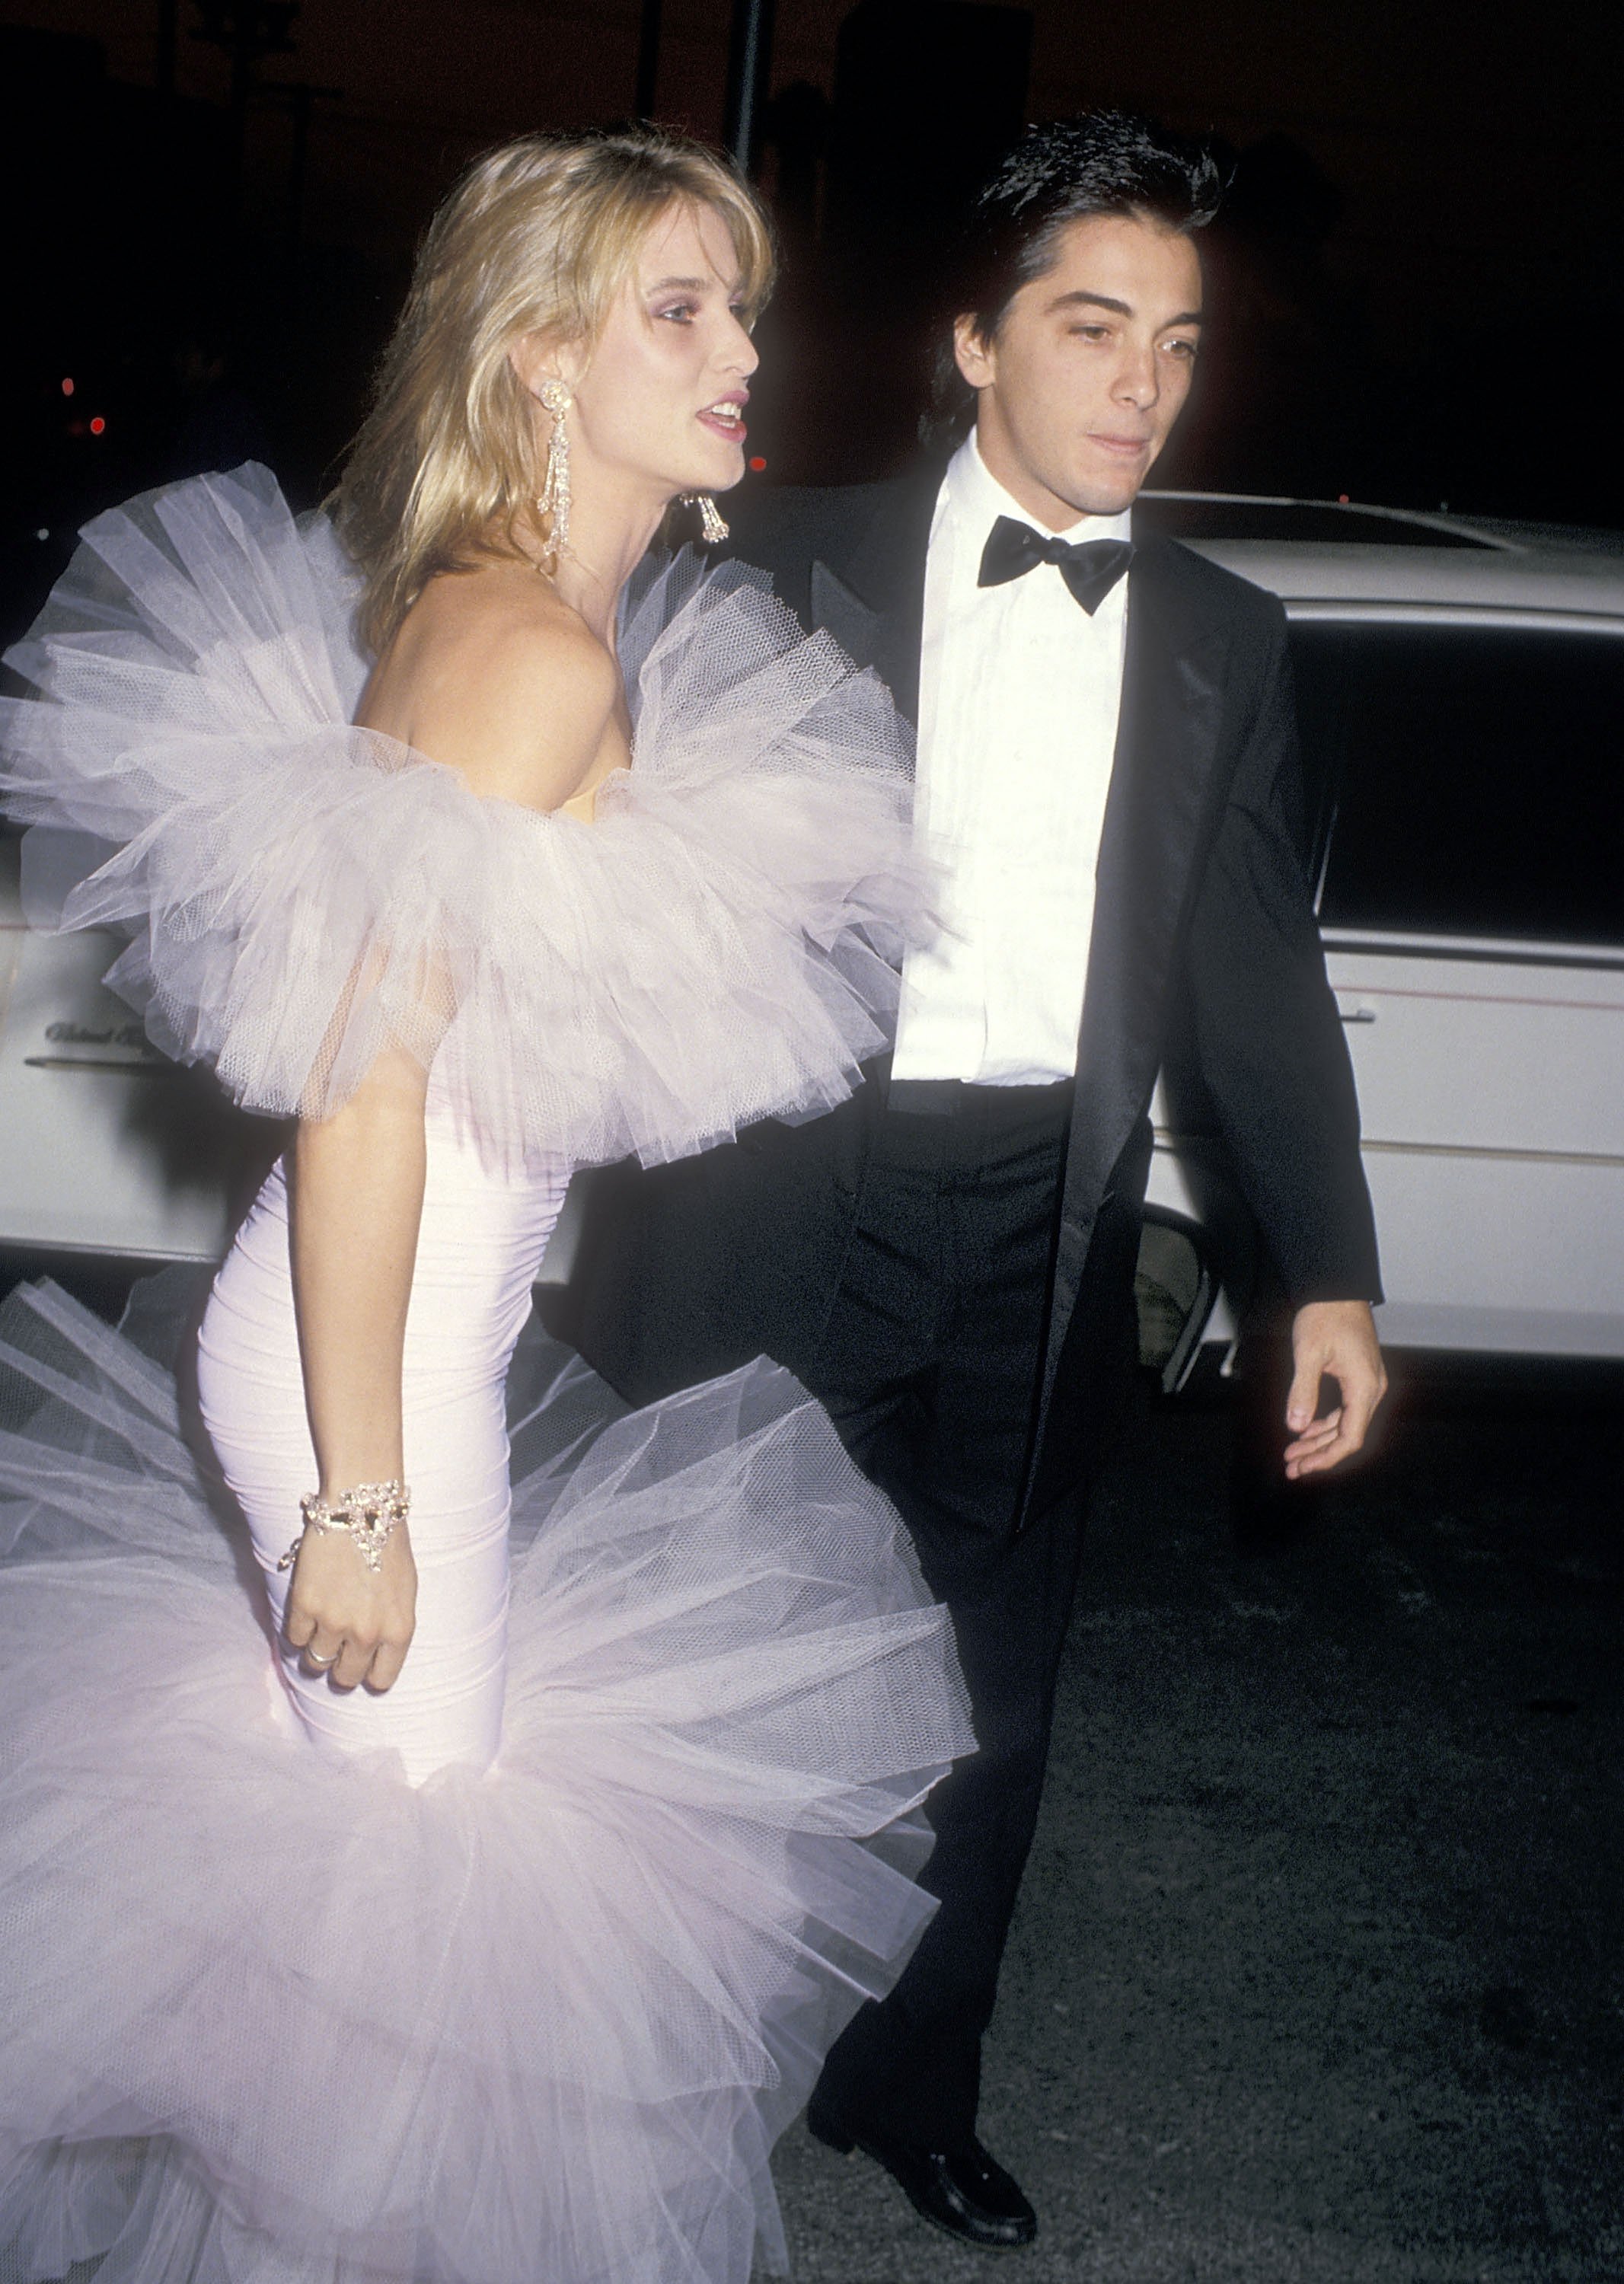 Nicolette Sheridan and actor Scott Baio attends the 12th Annual Variety Clubs International's Salute "All Star Party for Joan Collins" on November 22, 1987 at NBC Studios in Burbank, California | Source: Getty Images